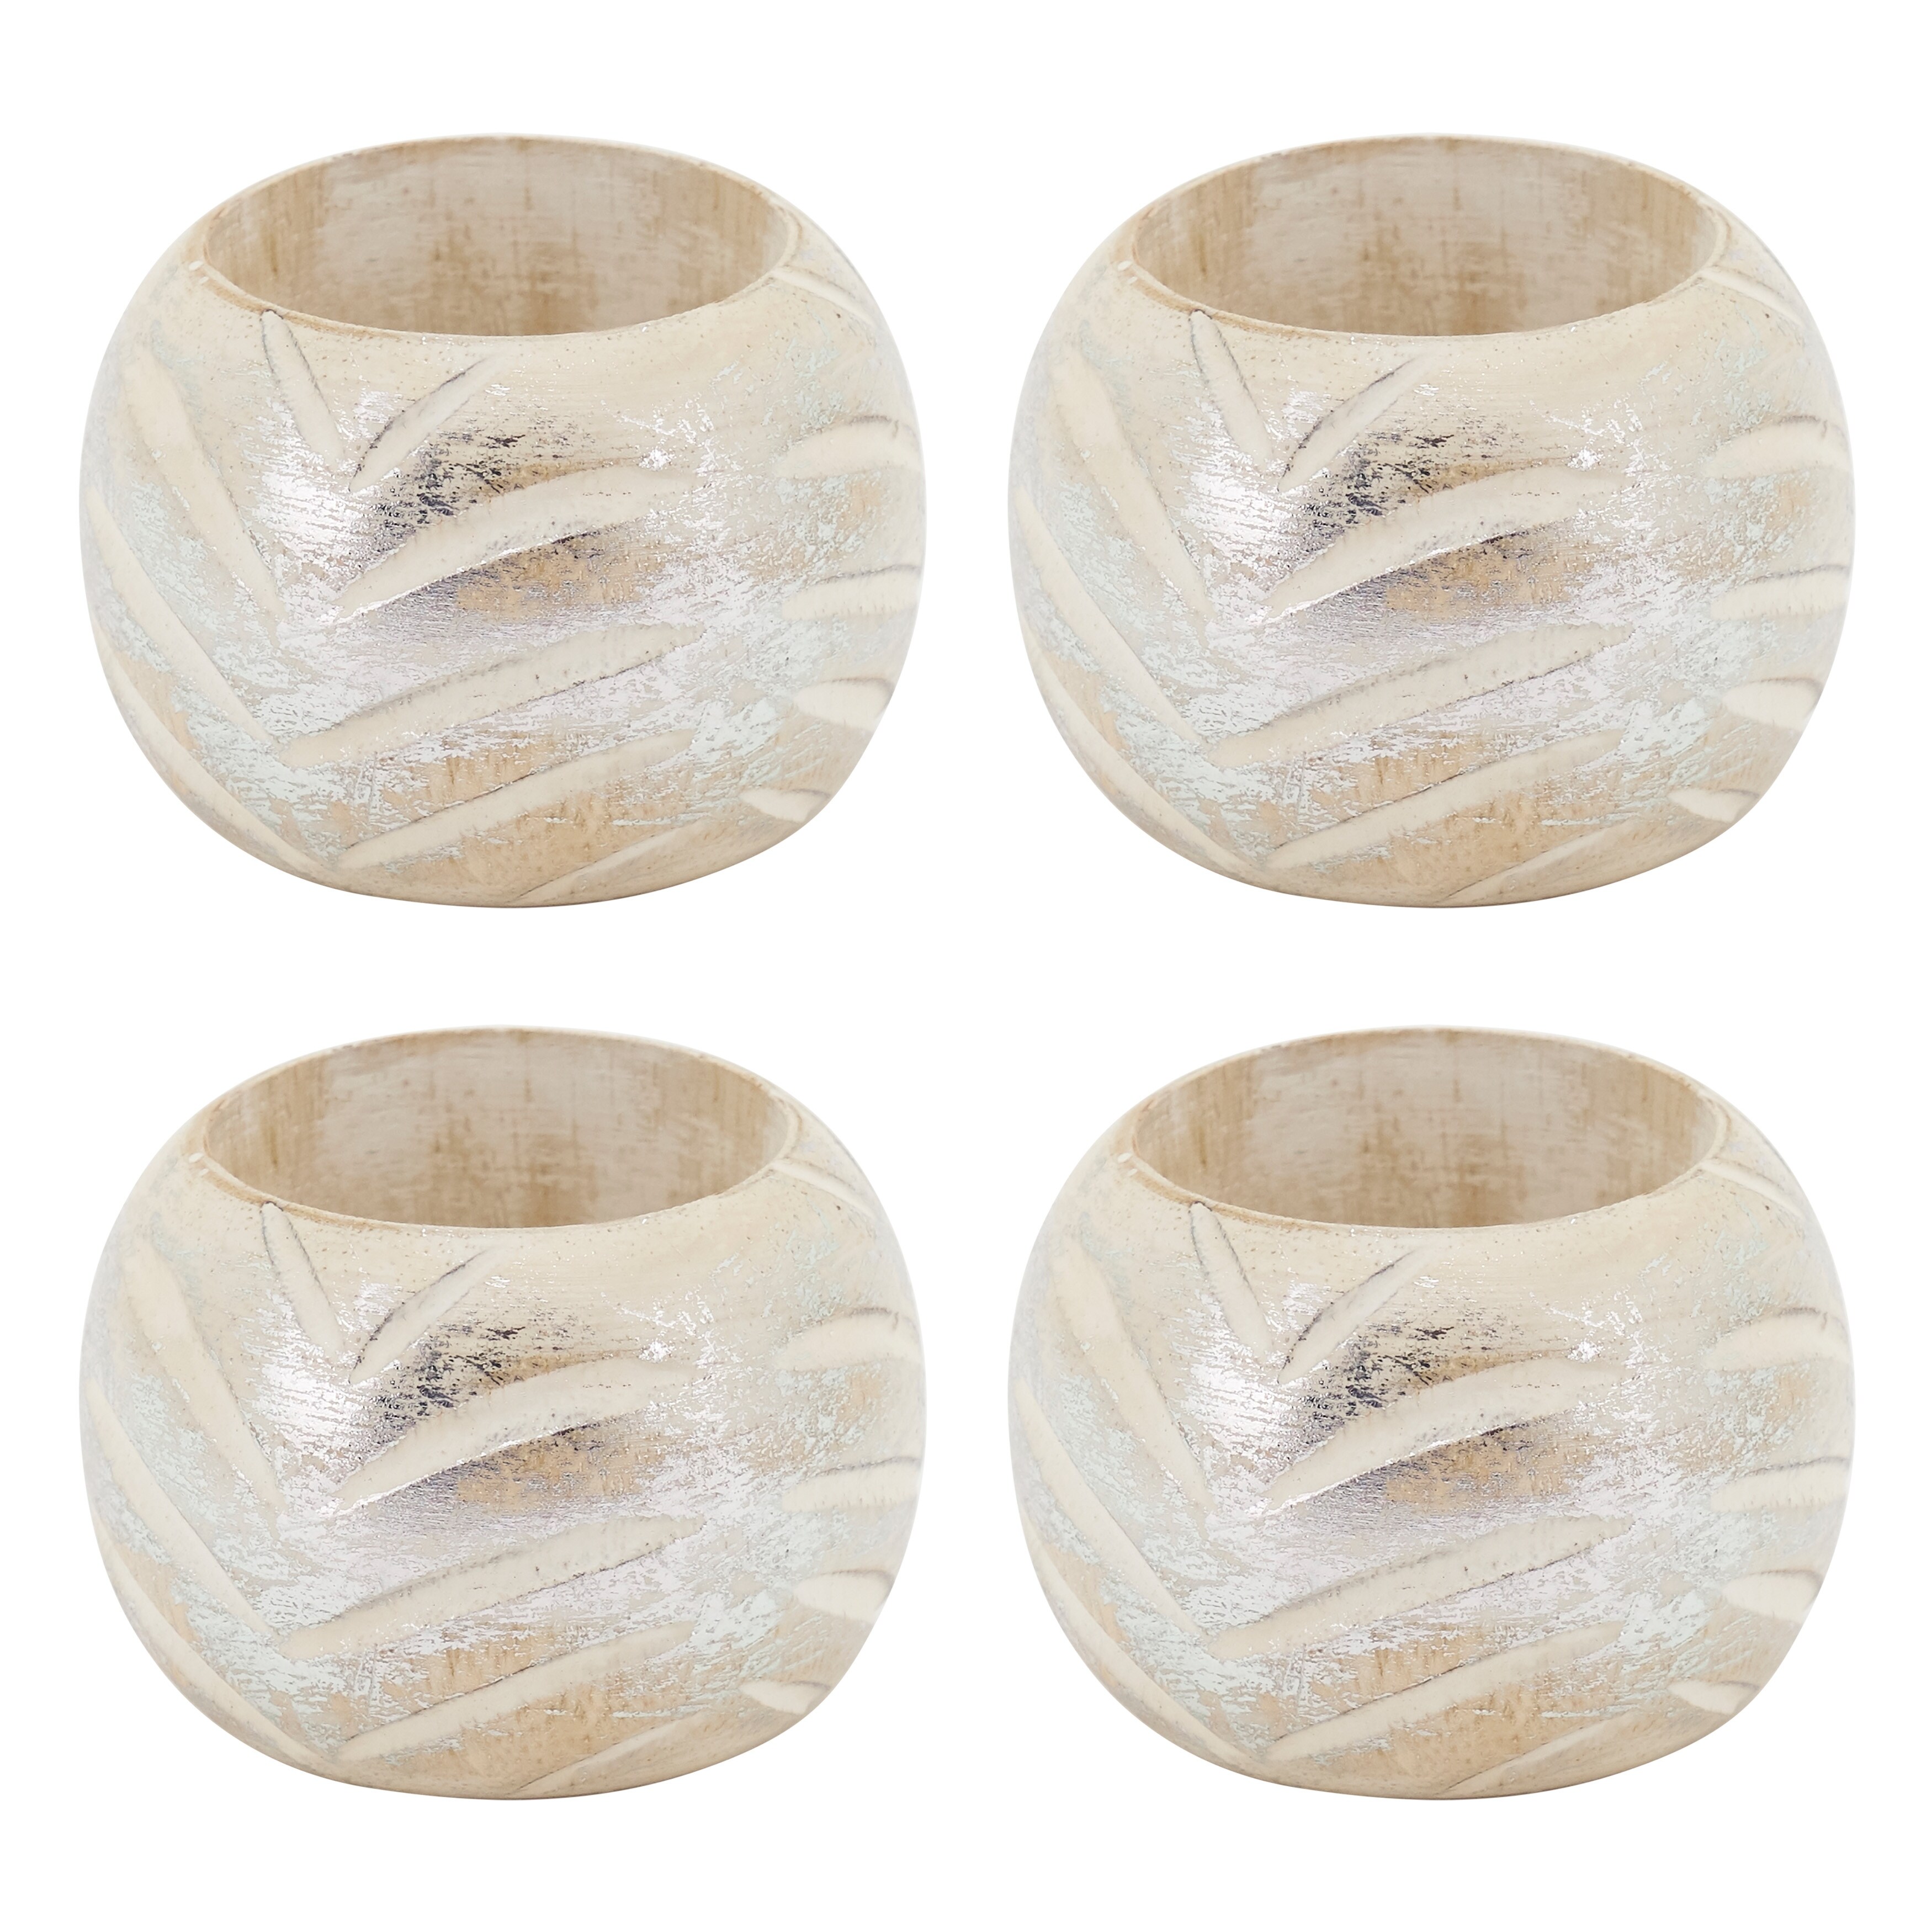 Wood Napkin Rings with Striped Design (Set of 4) - Bed Bath & Beyond -  31431366